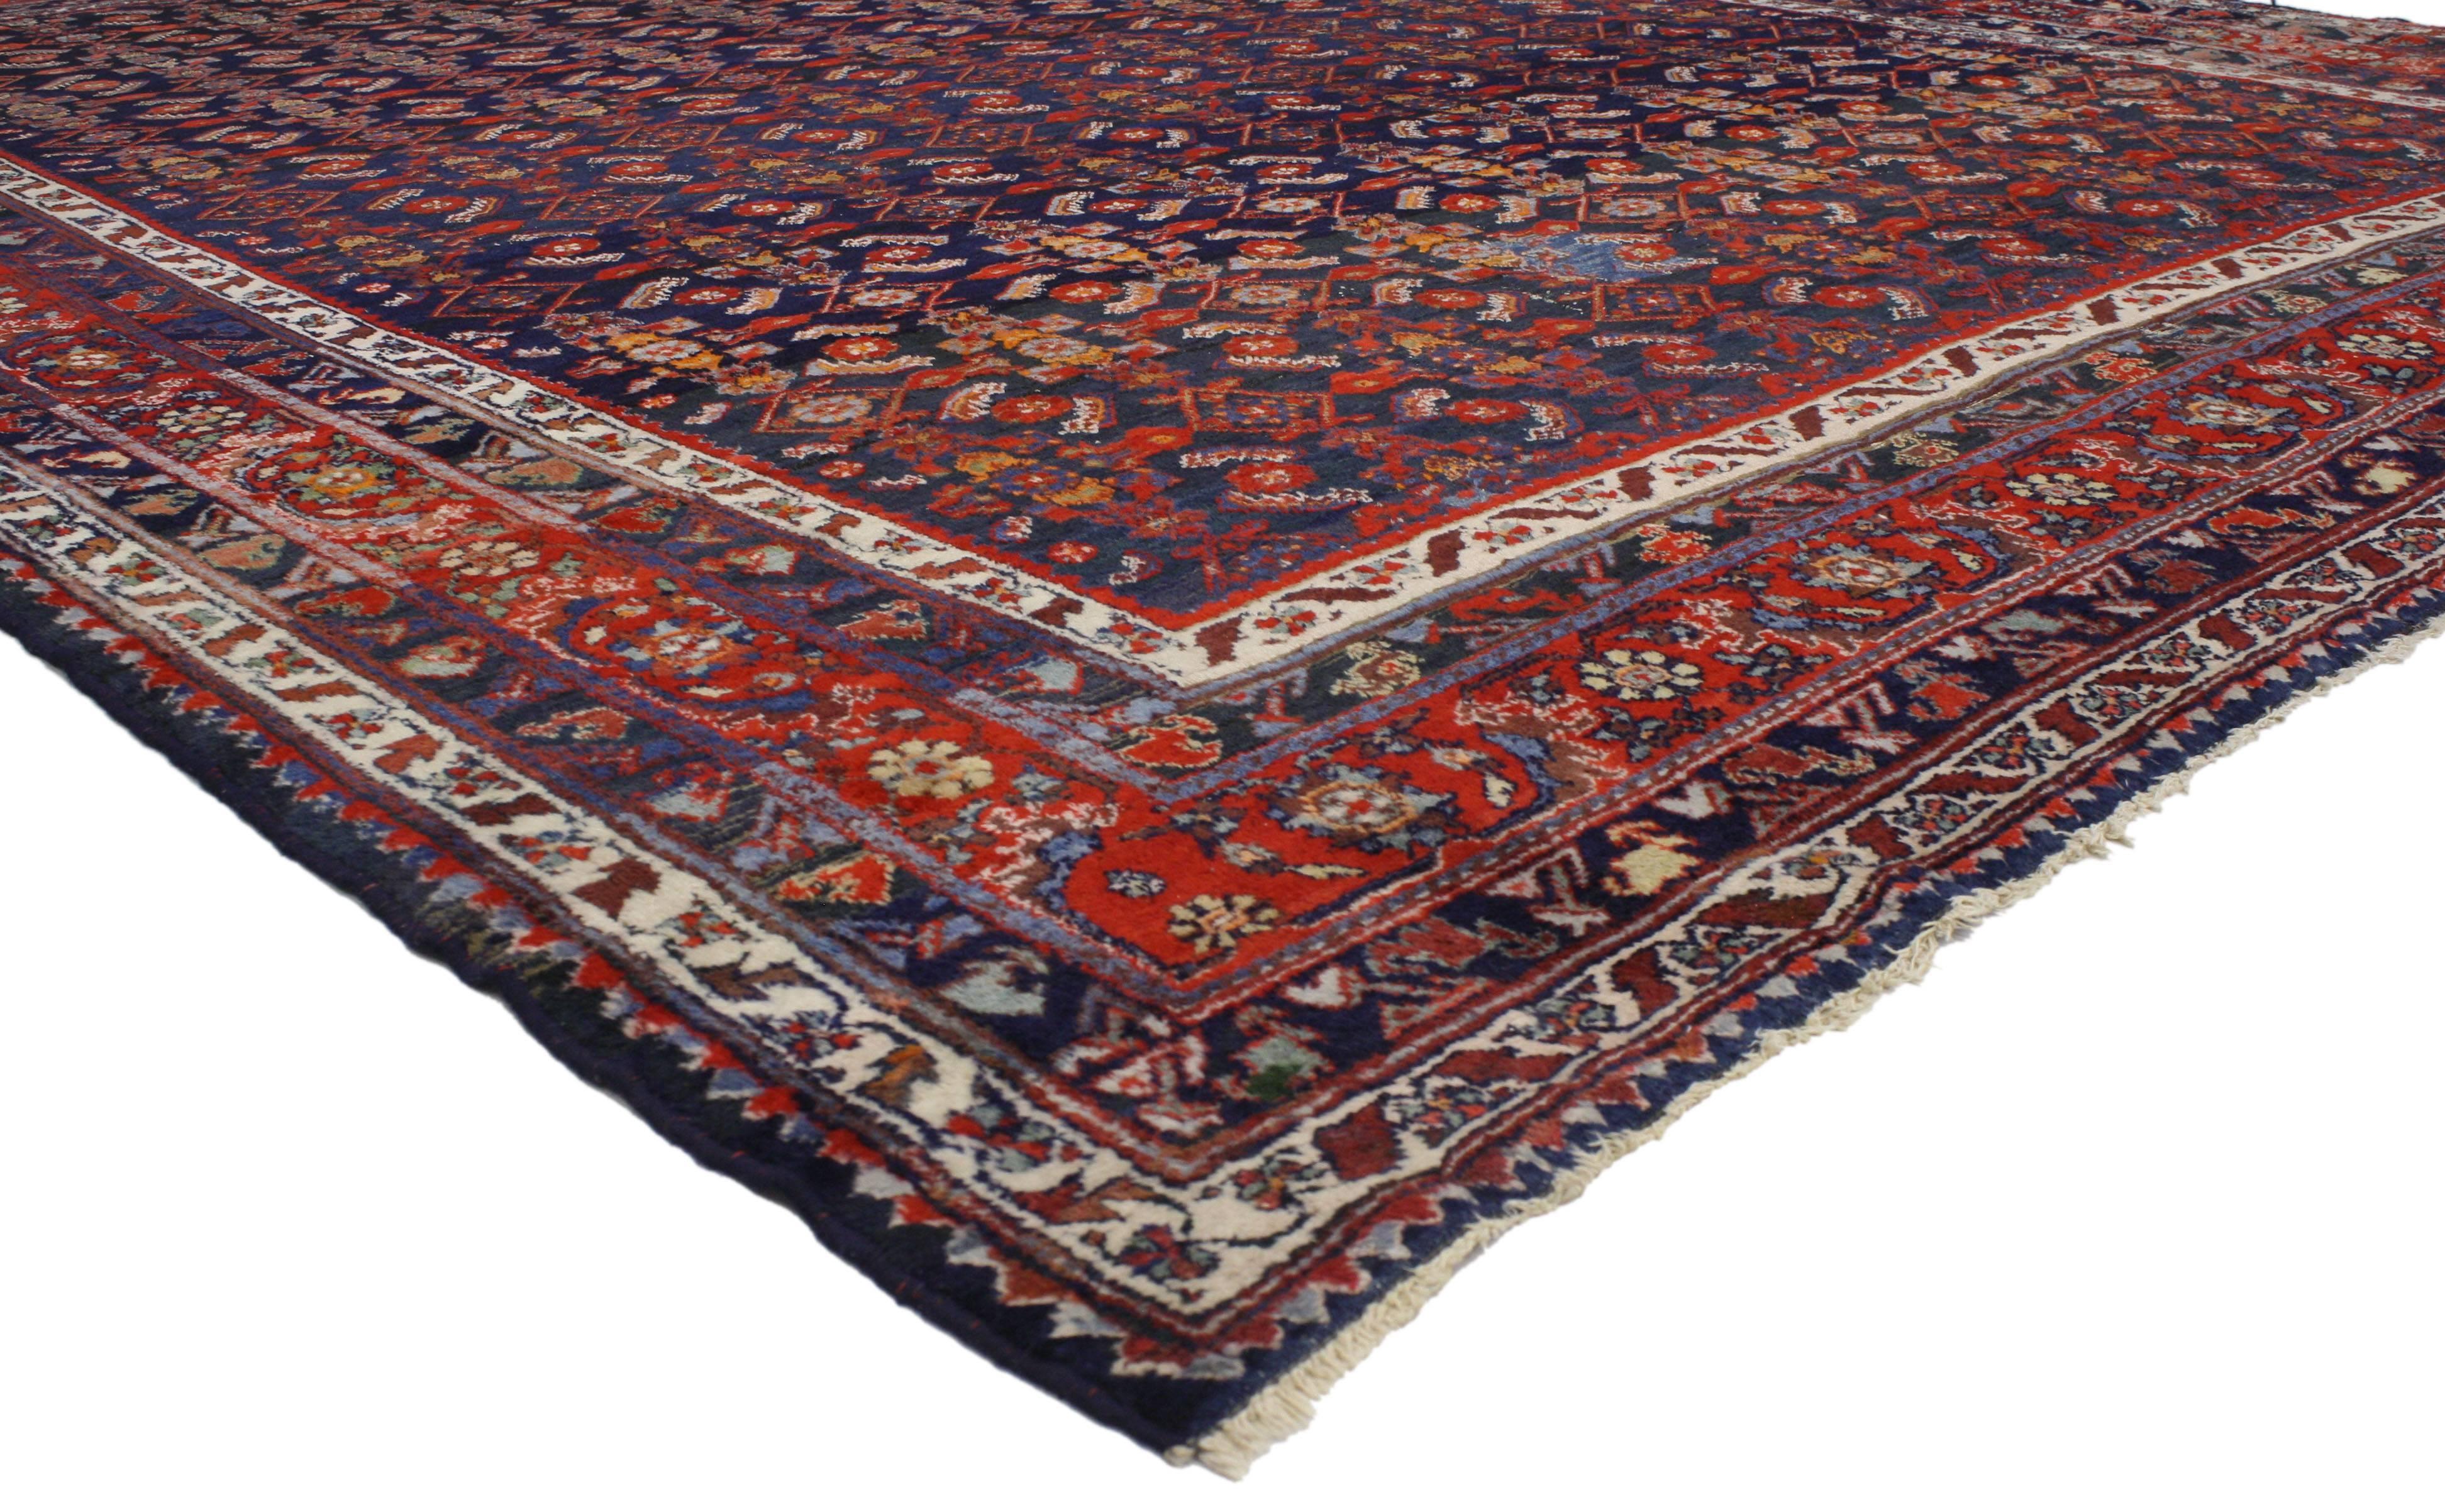 77016 Antique Persian Malayer Rug with Traditional Modern Style. Providing an element of comfort, stately presence and functional versatility, this antique Persian Malayer rug features a traditional modern style. Highlighting an all-over pattern of